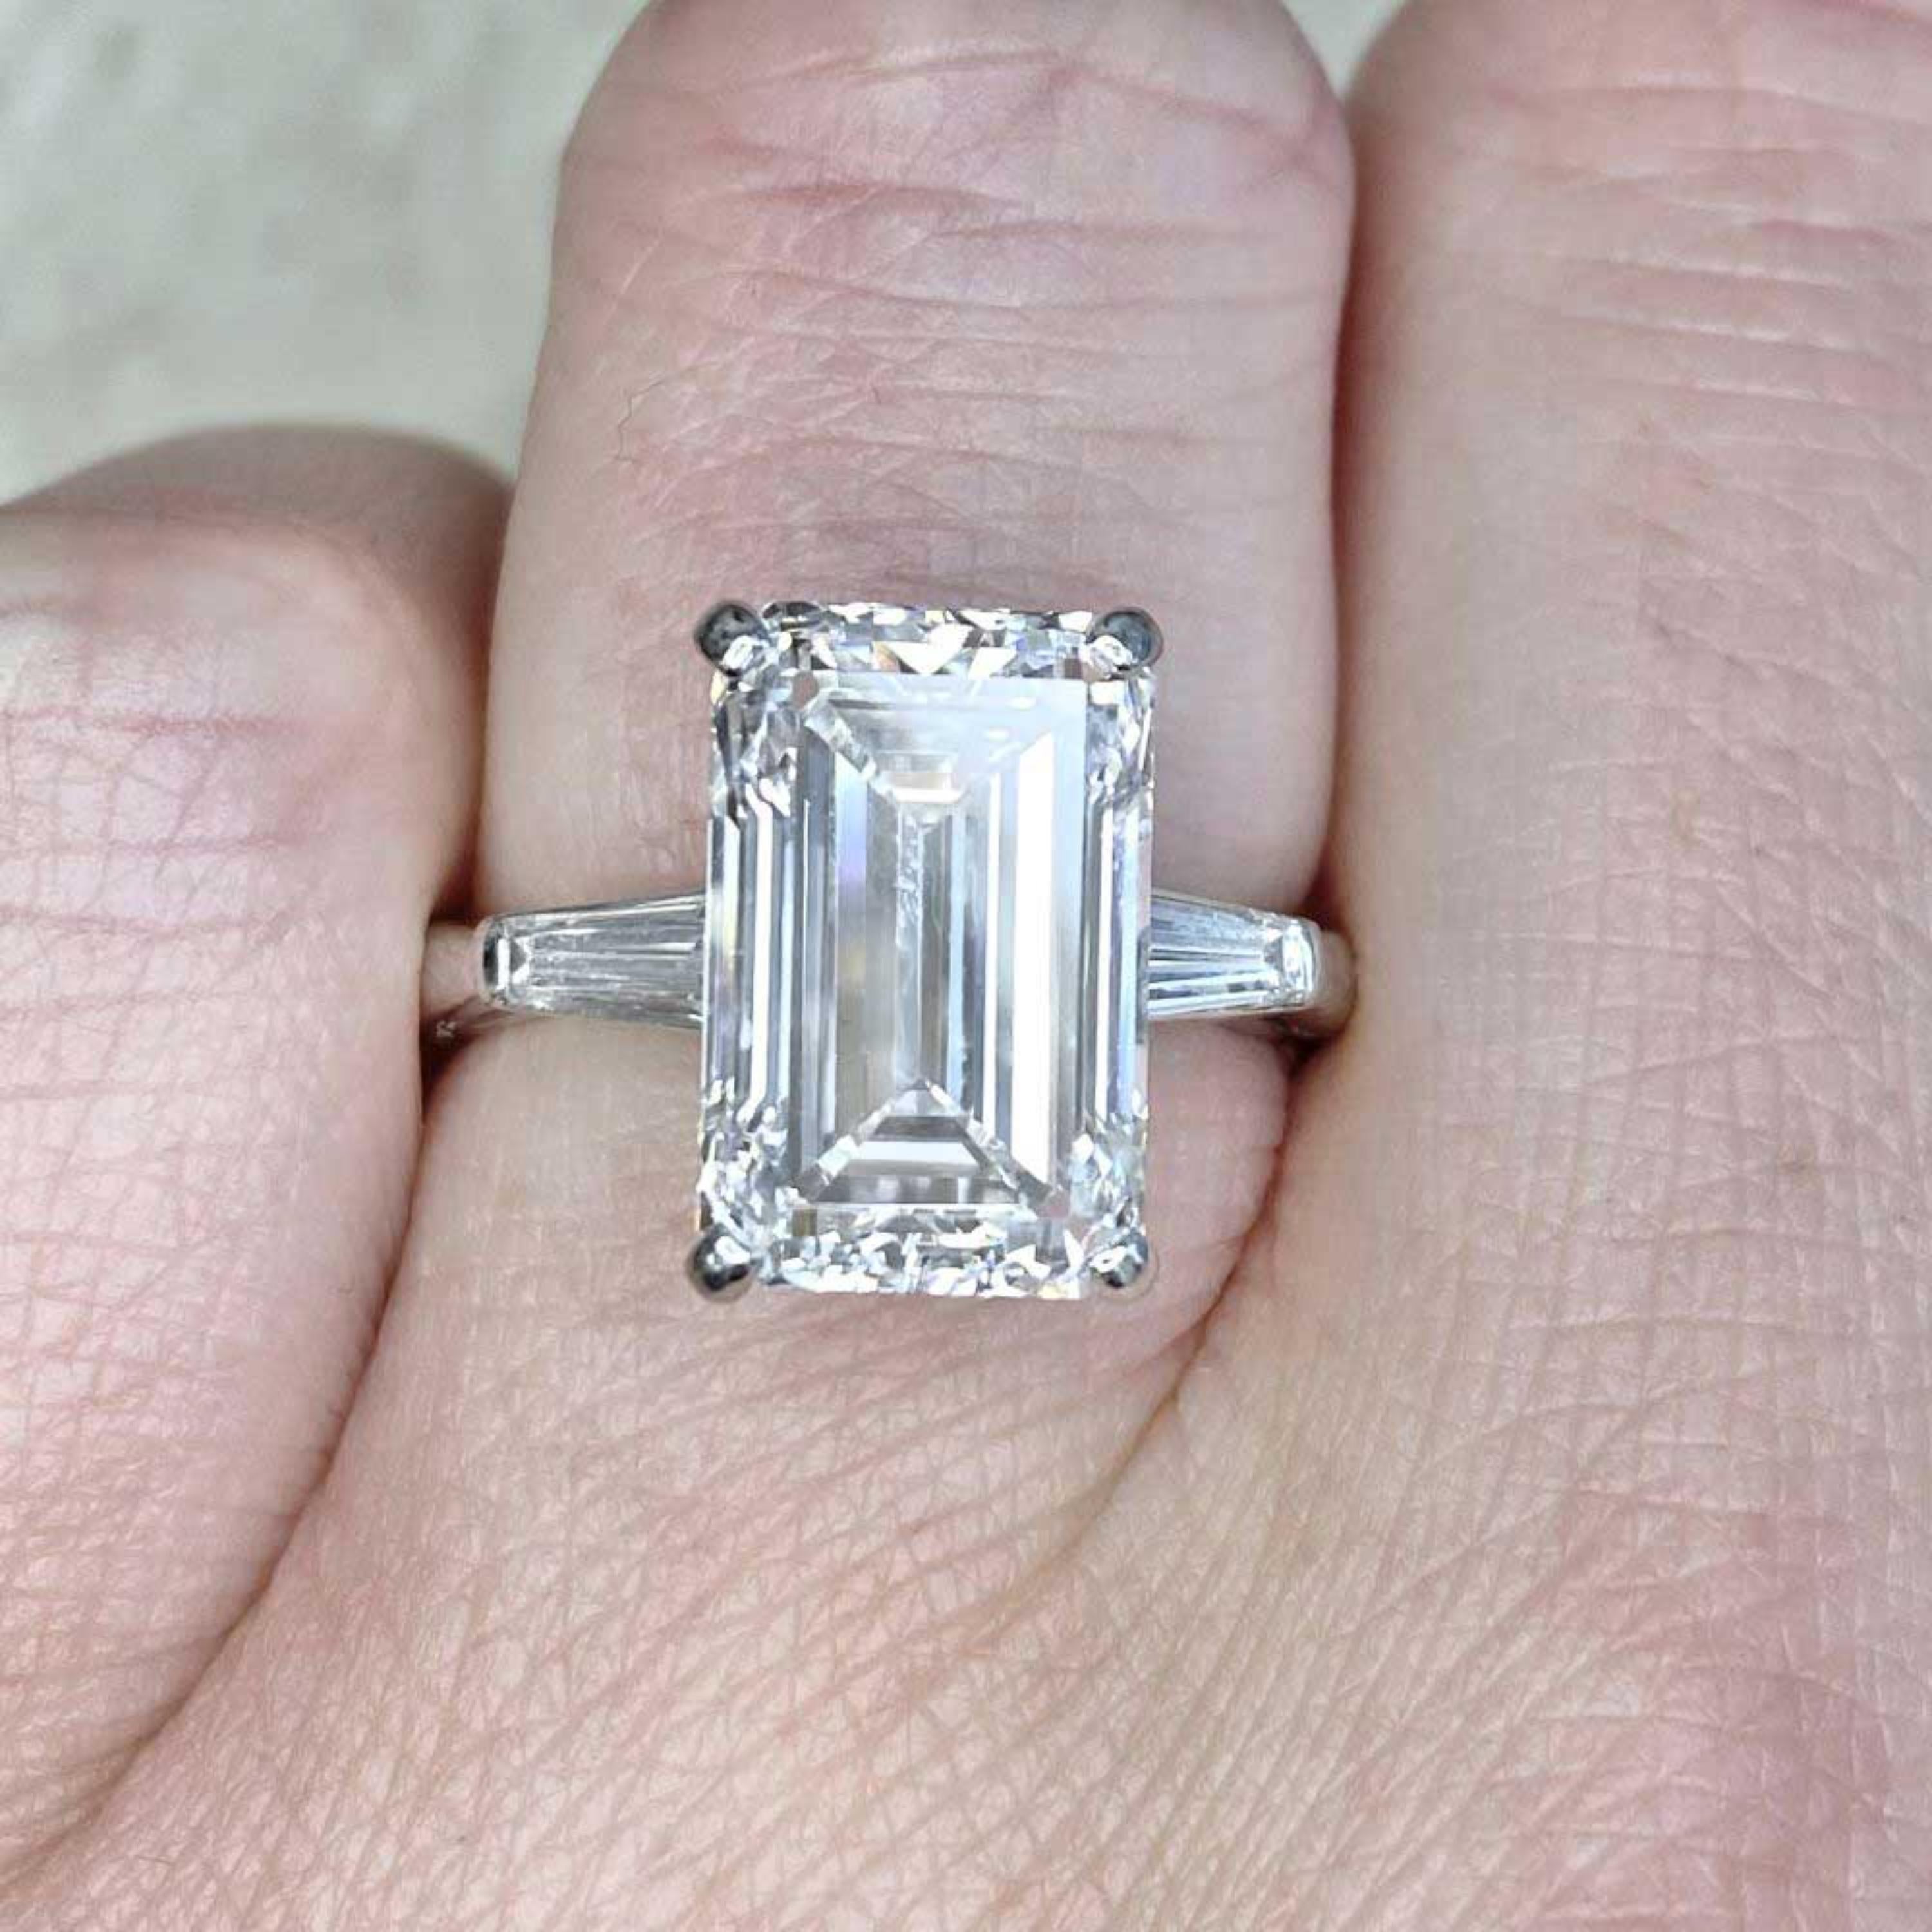 GIA Certified Giant 5.31 Carat F Color Rare Diamond Three Stone Engagement Ring

A Copy of the GIA Certificate is Available Upon Request.

A stunning ring featuring IGI/GIA Certified 5.31 Carat Natural Diamond and Diamond Accents set in Platinum.

A